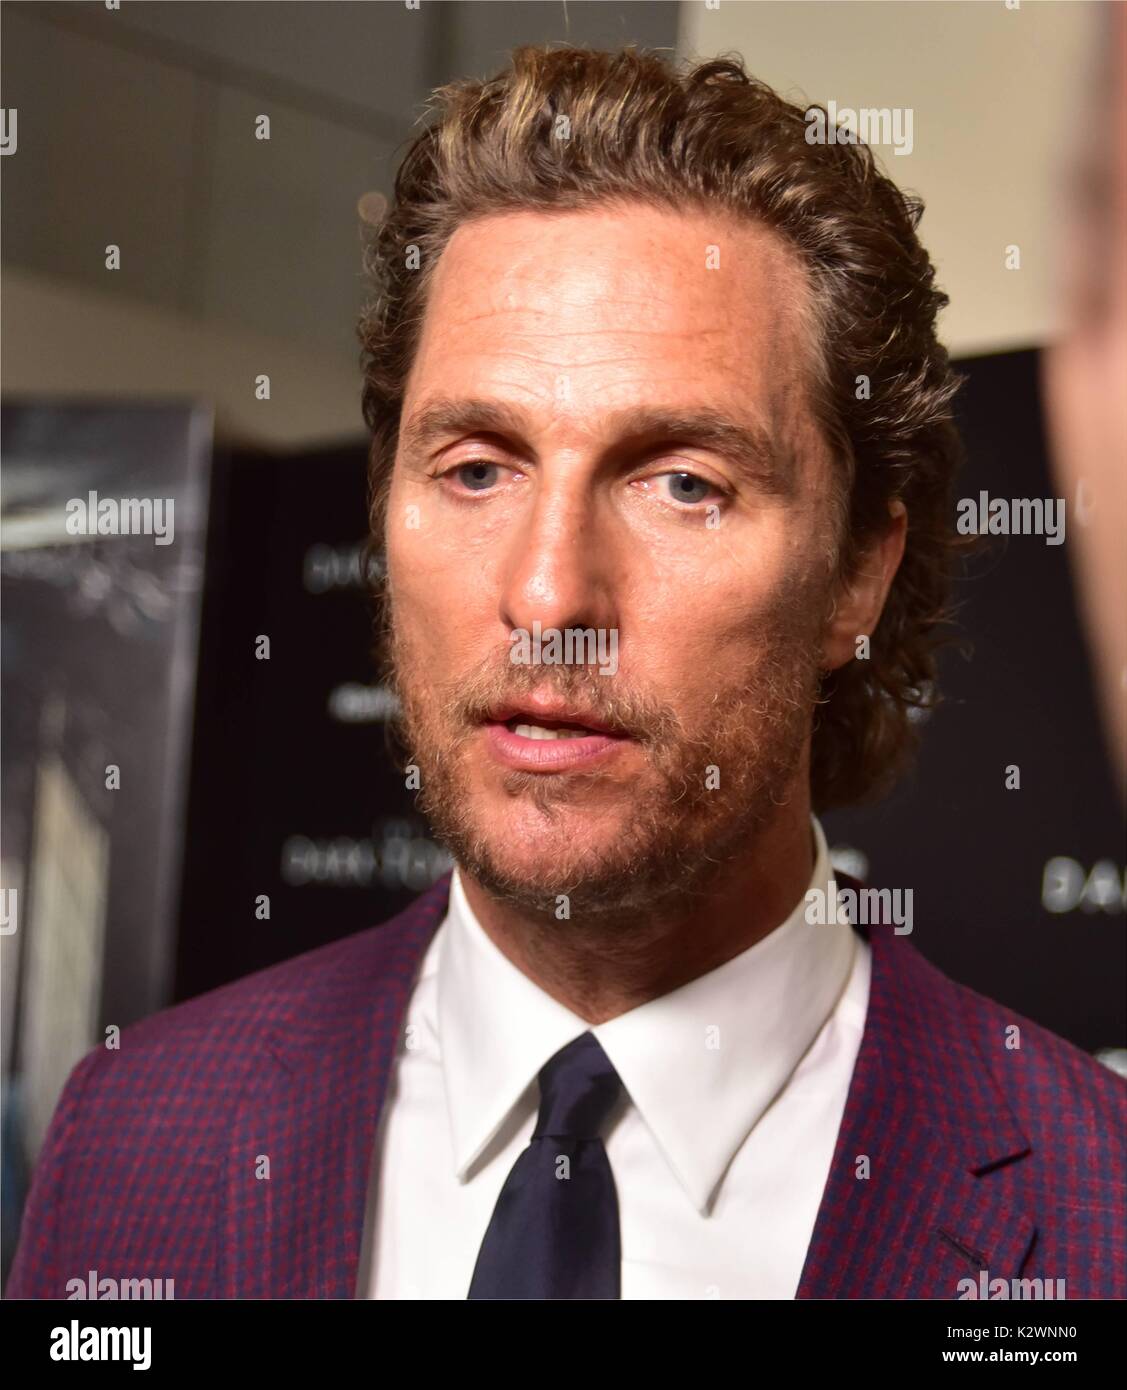 New York premiere of 'The Dark Tower' at the Museum of Modern Art in New York City.  Featuring: Matthew McConaughey Where: New York City, New York, United States When: 31 Jul 2017 Credit: LK/WENN Stock Photo